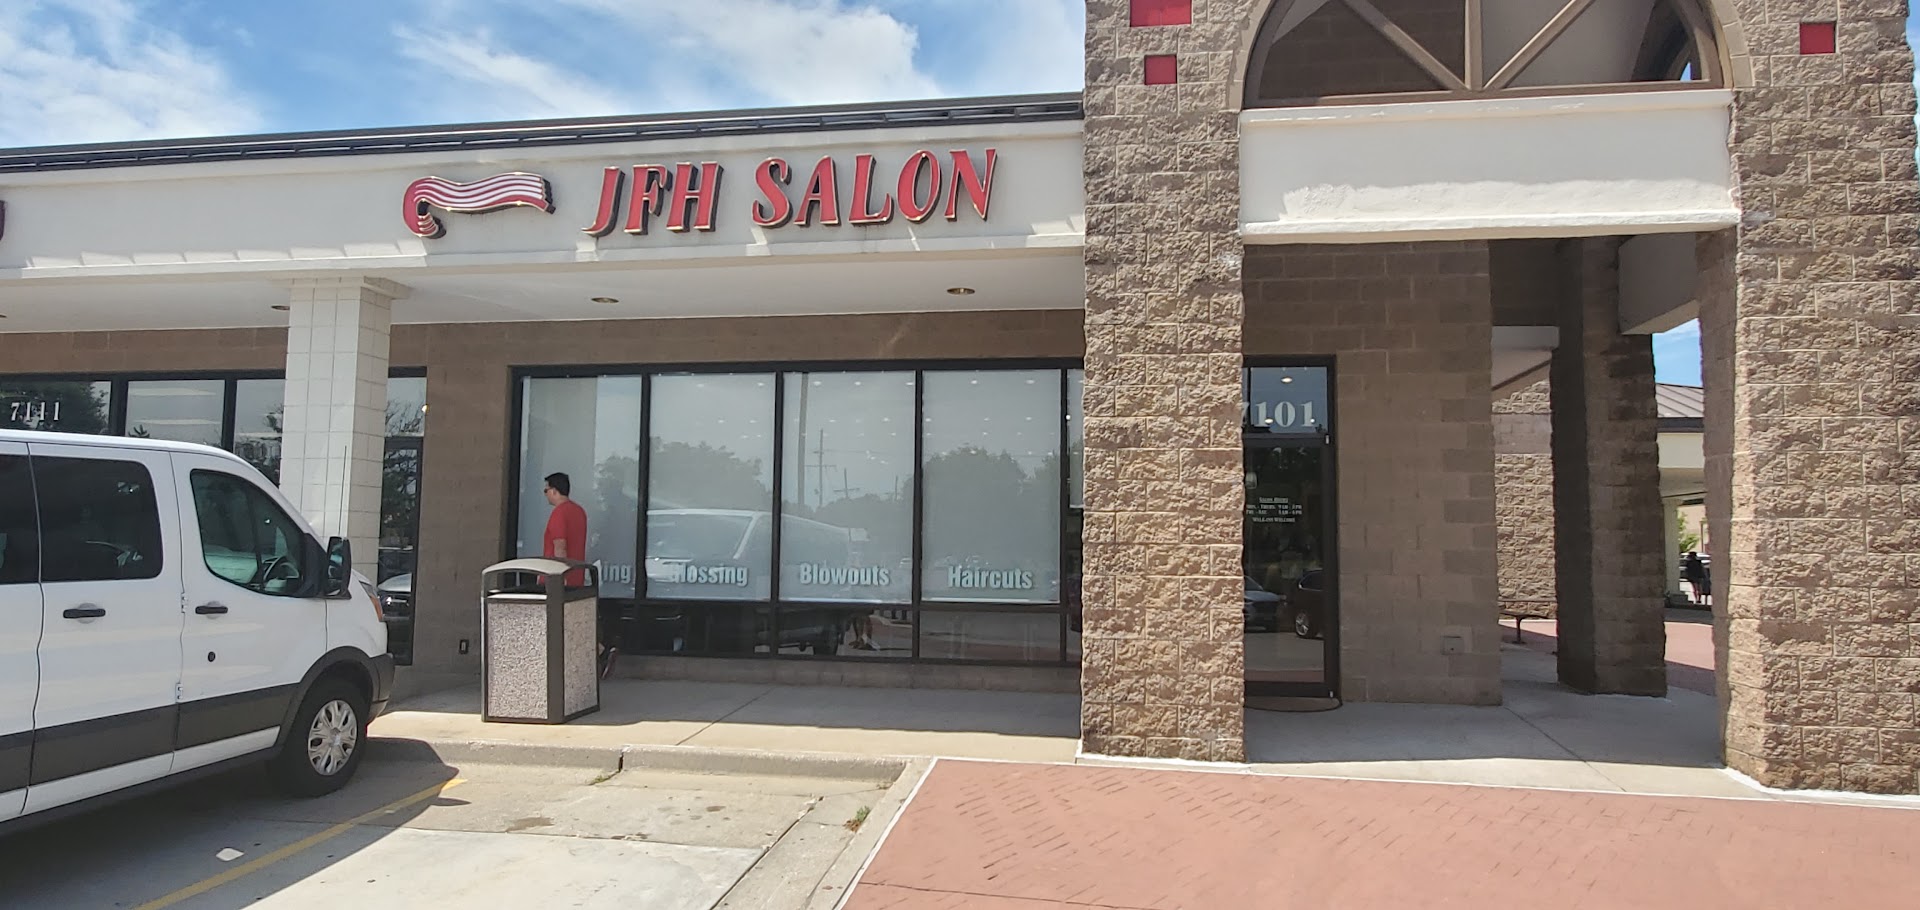 Just For Hair Salon